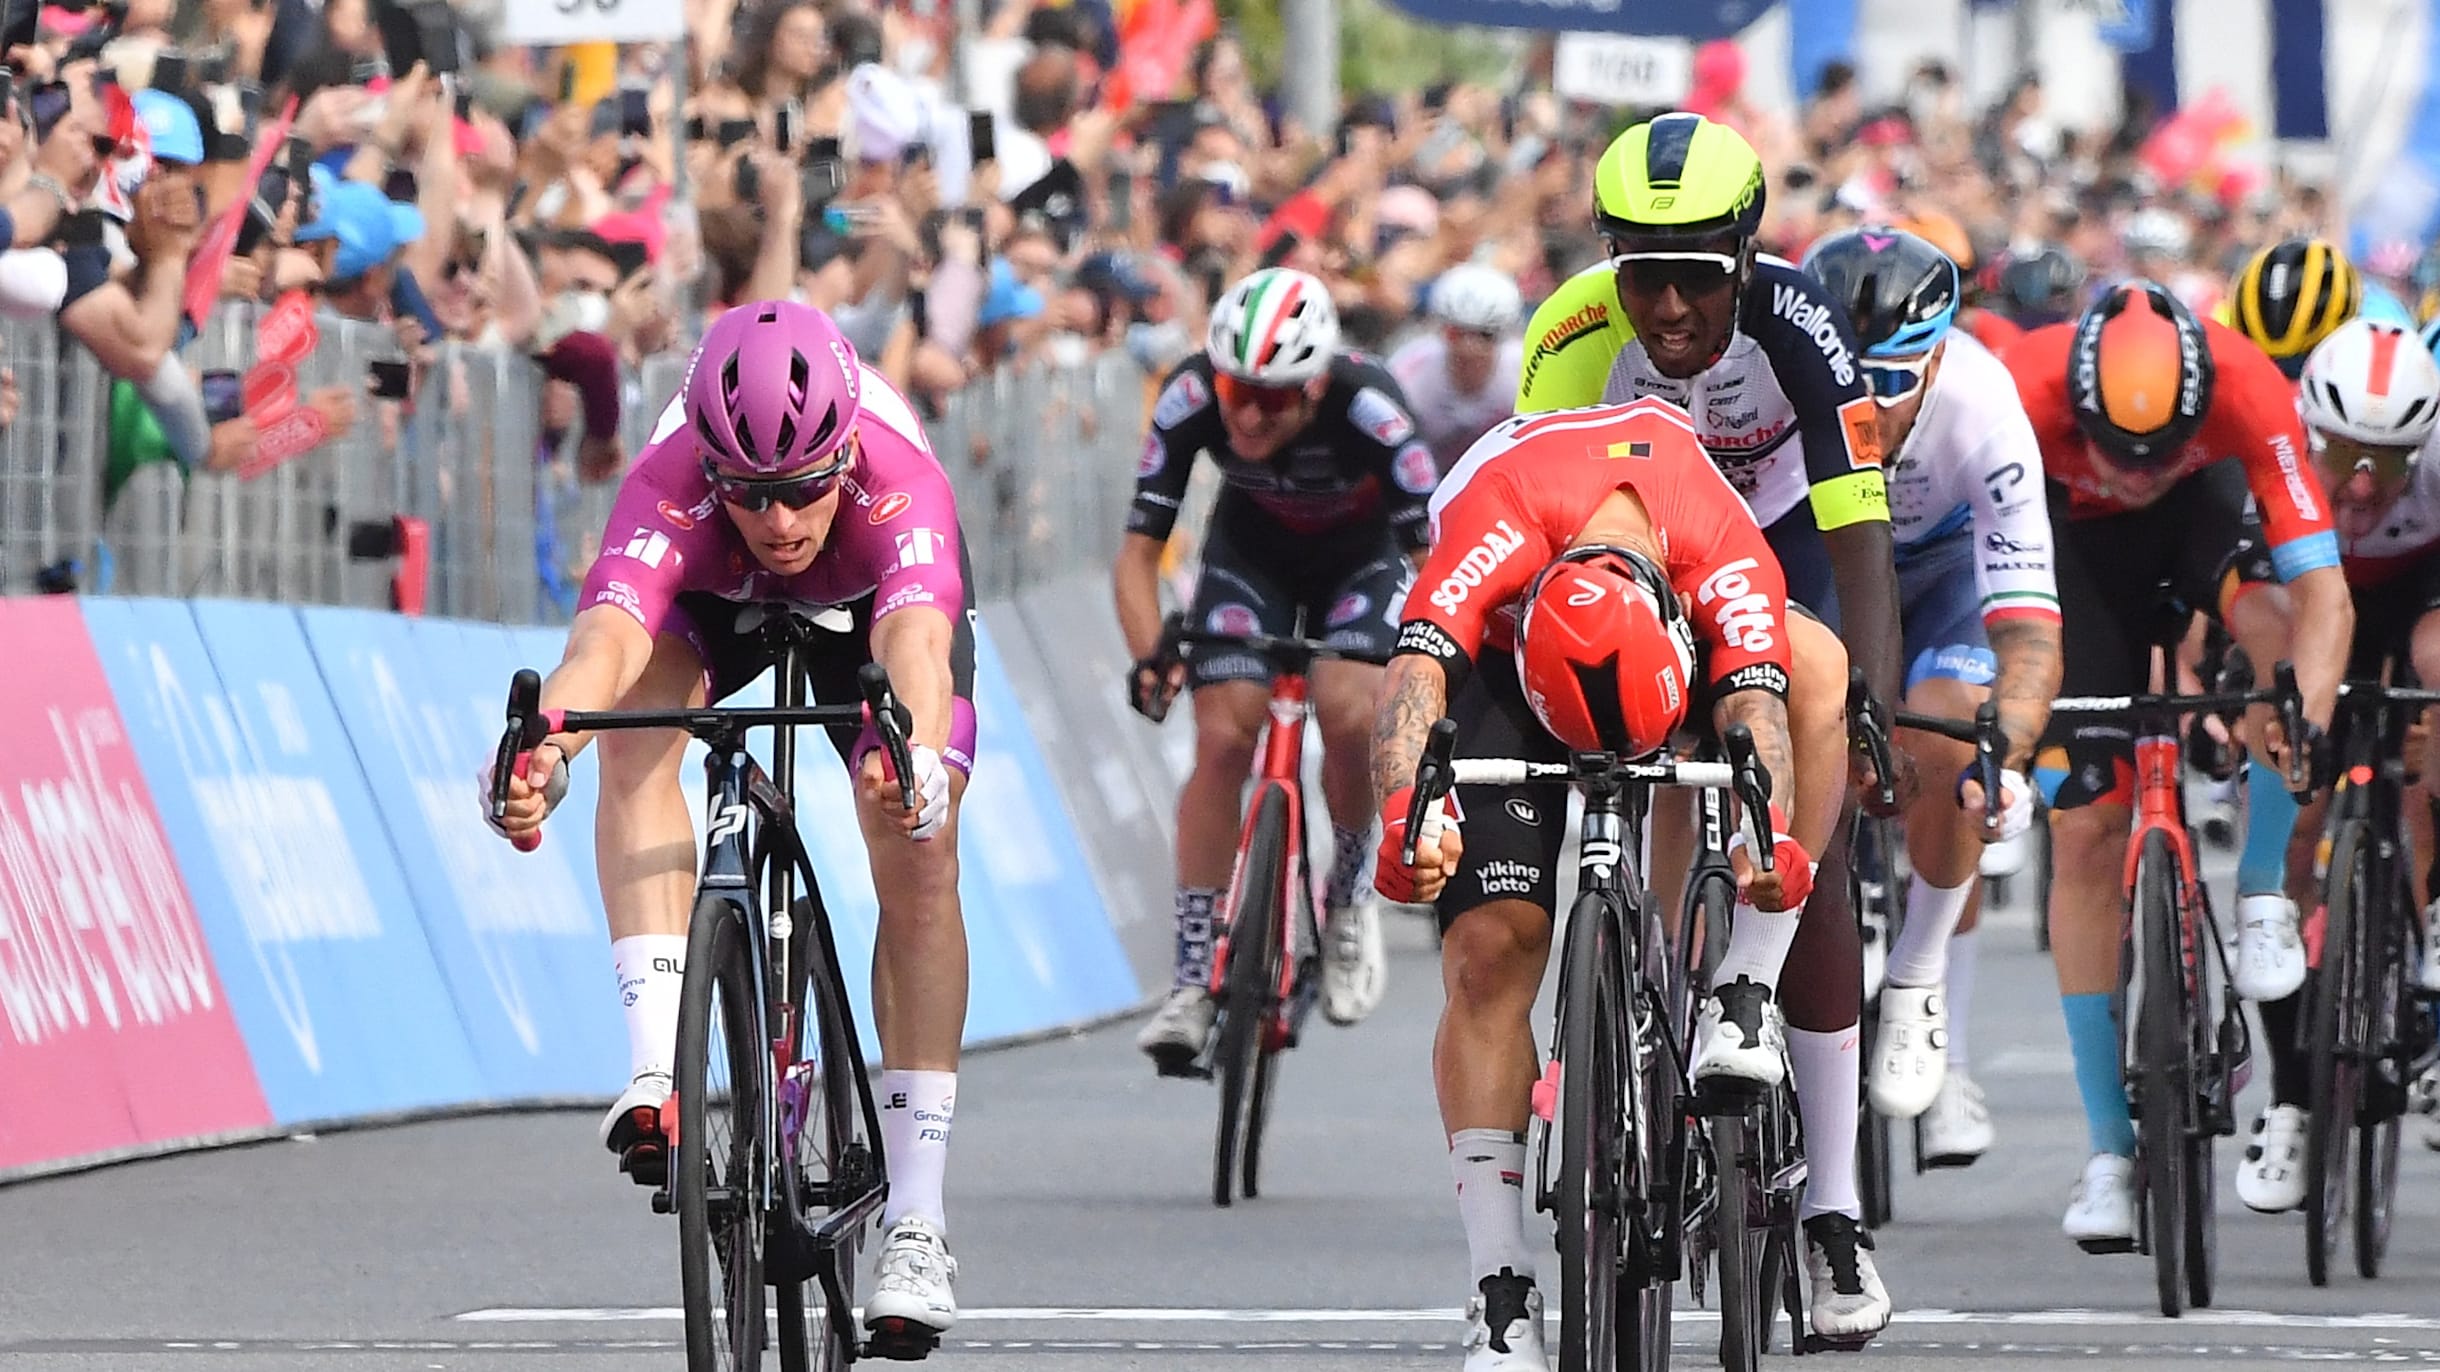 2022 Giro dItalia Demare wins stage 6 after thrilling sprint